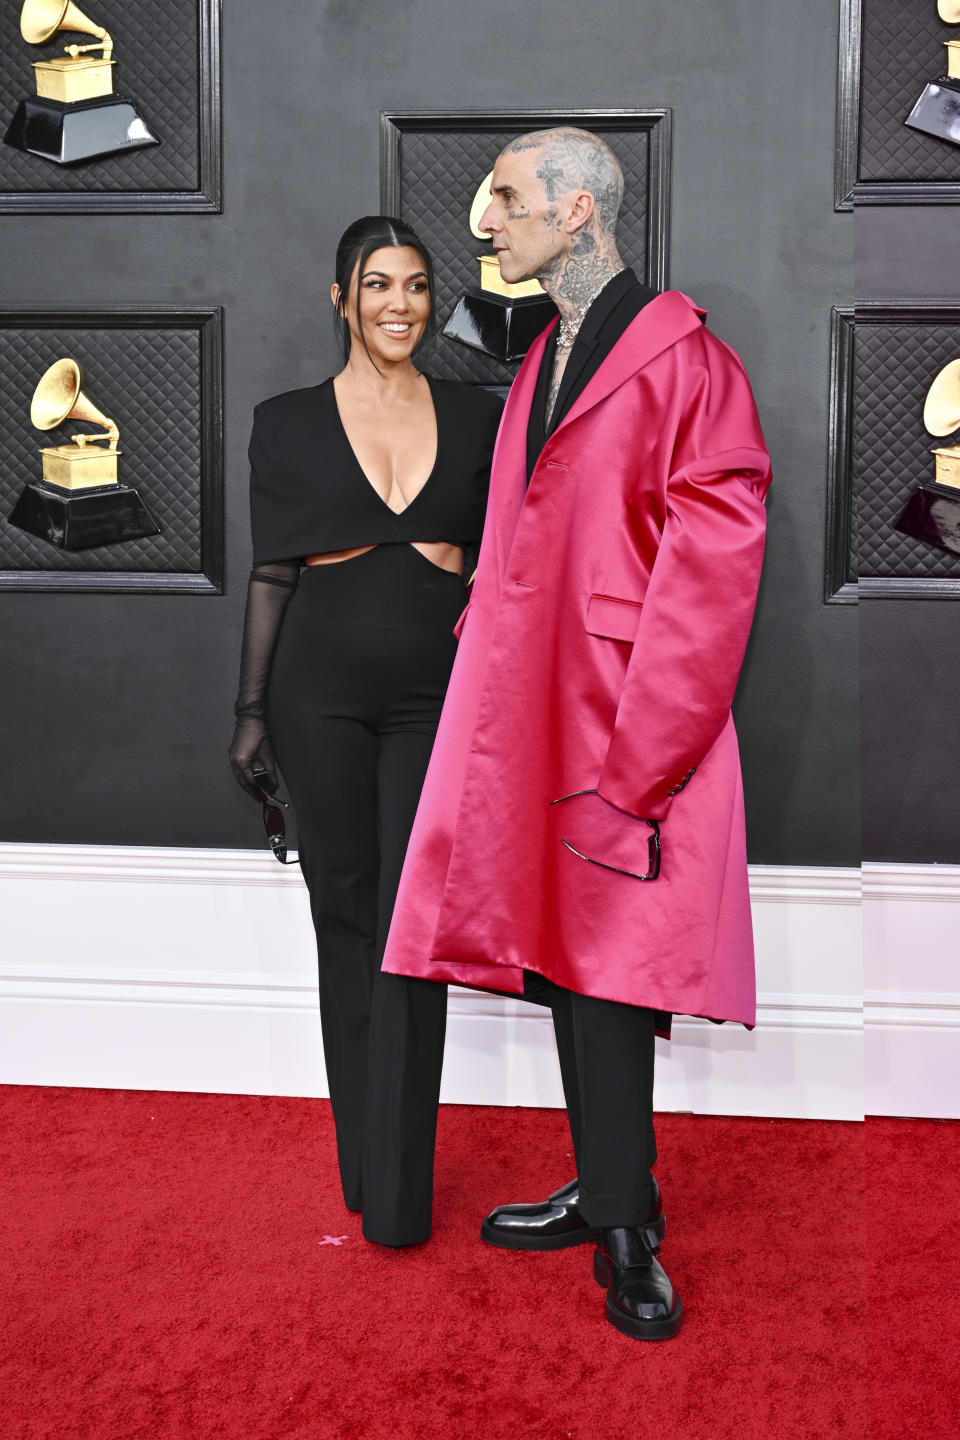 Kourtney Kardashian and Travis Barker at the 64th Annual Grammy Awards held at the MGM Grand Garden Arena on April 3rd, 2022 in Las Vegas, Nevada.